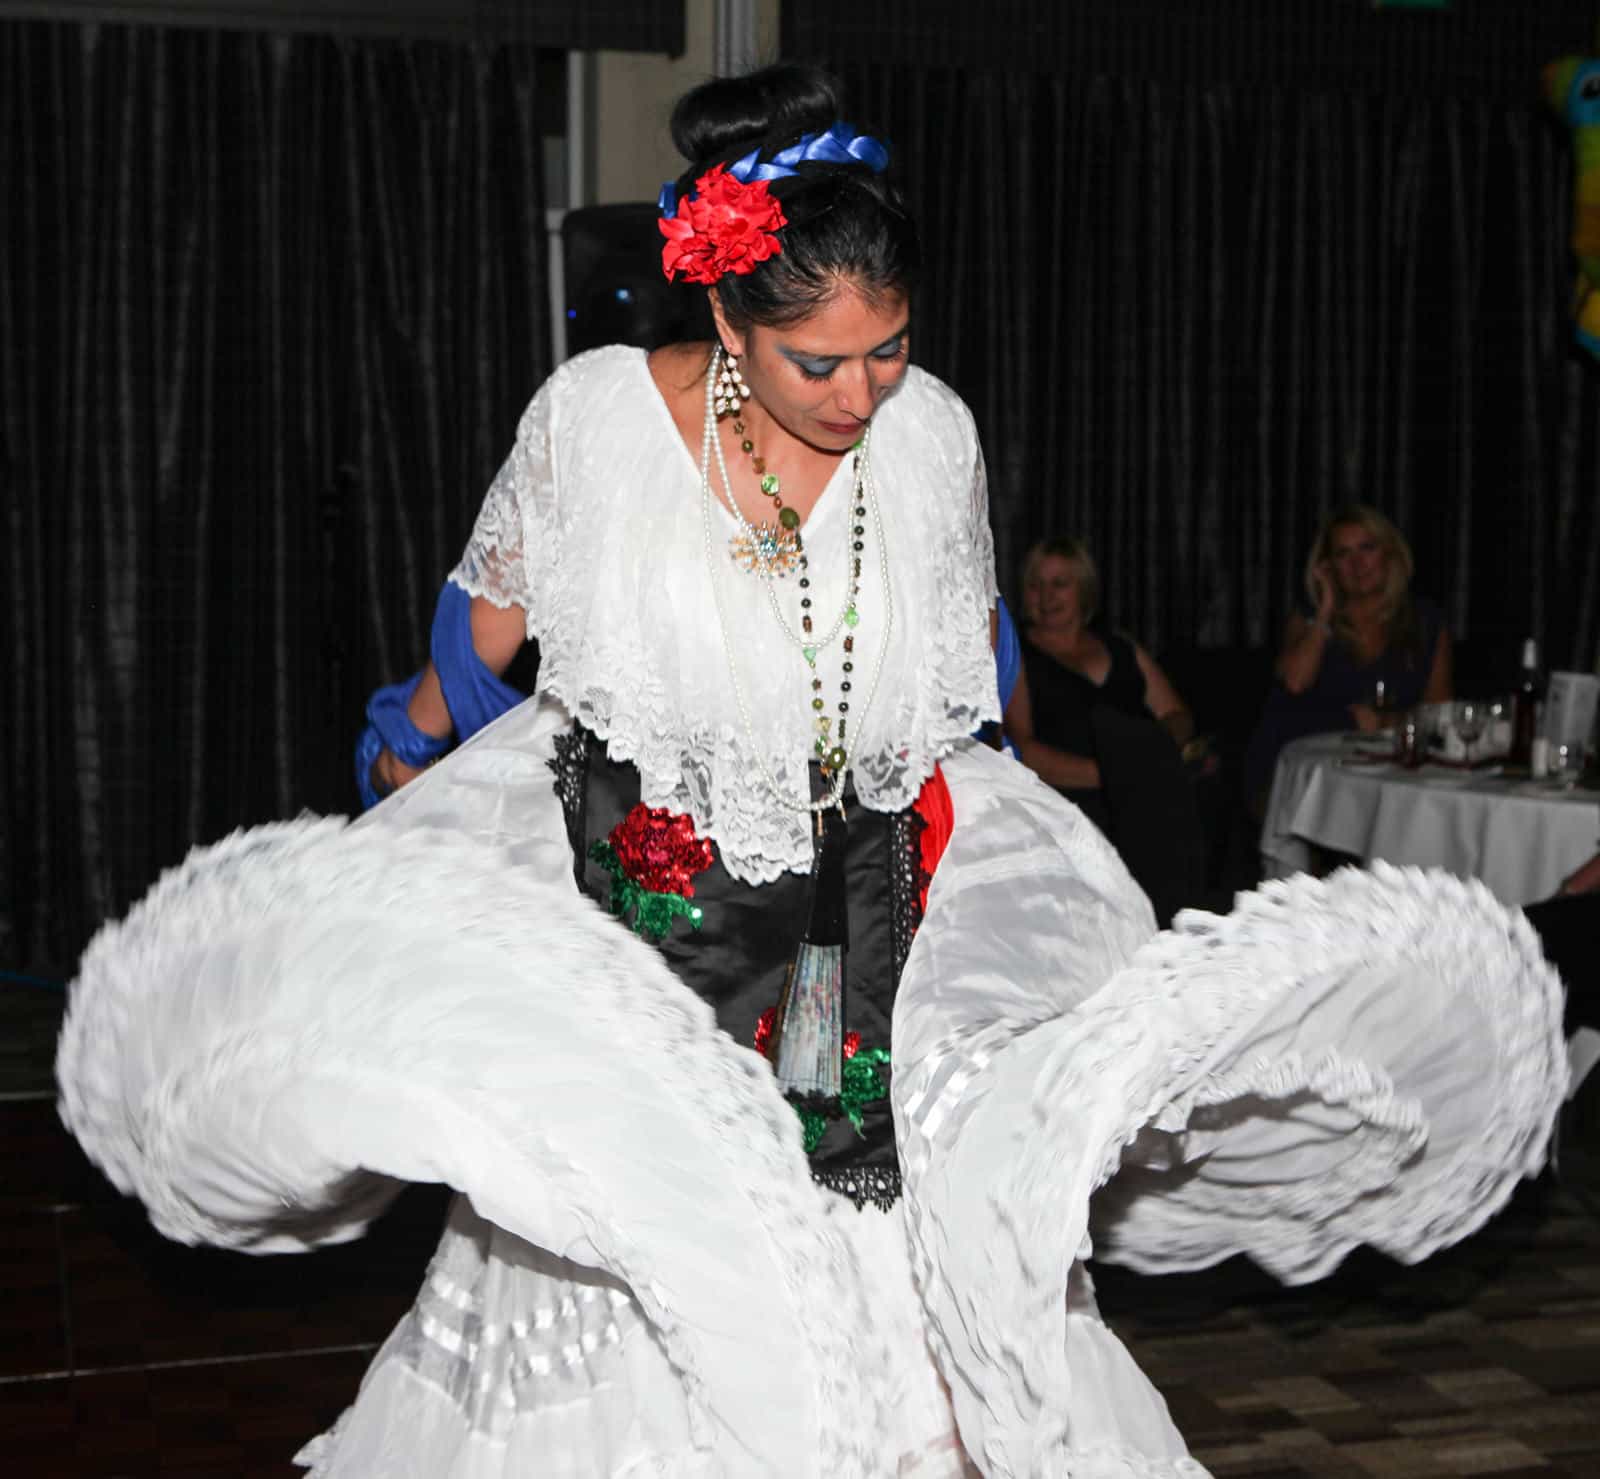 Mexican dancing for an evening event